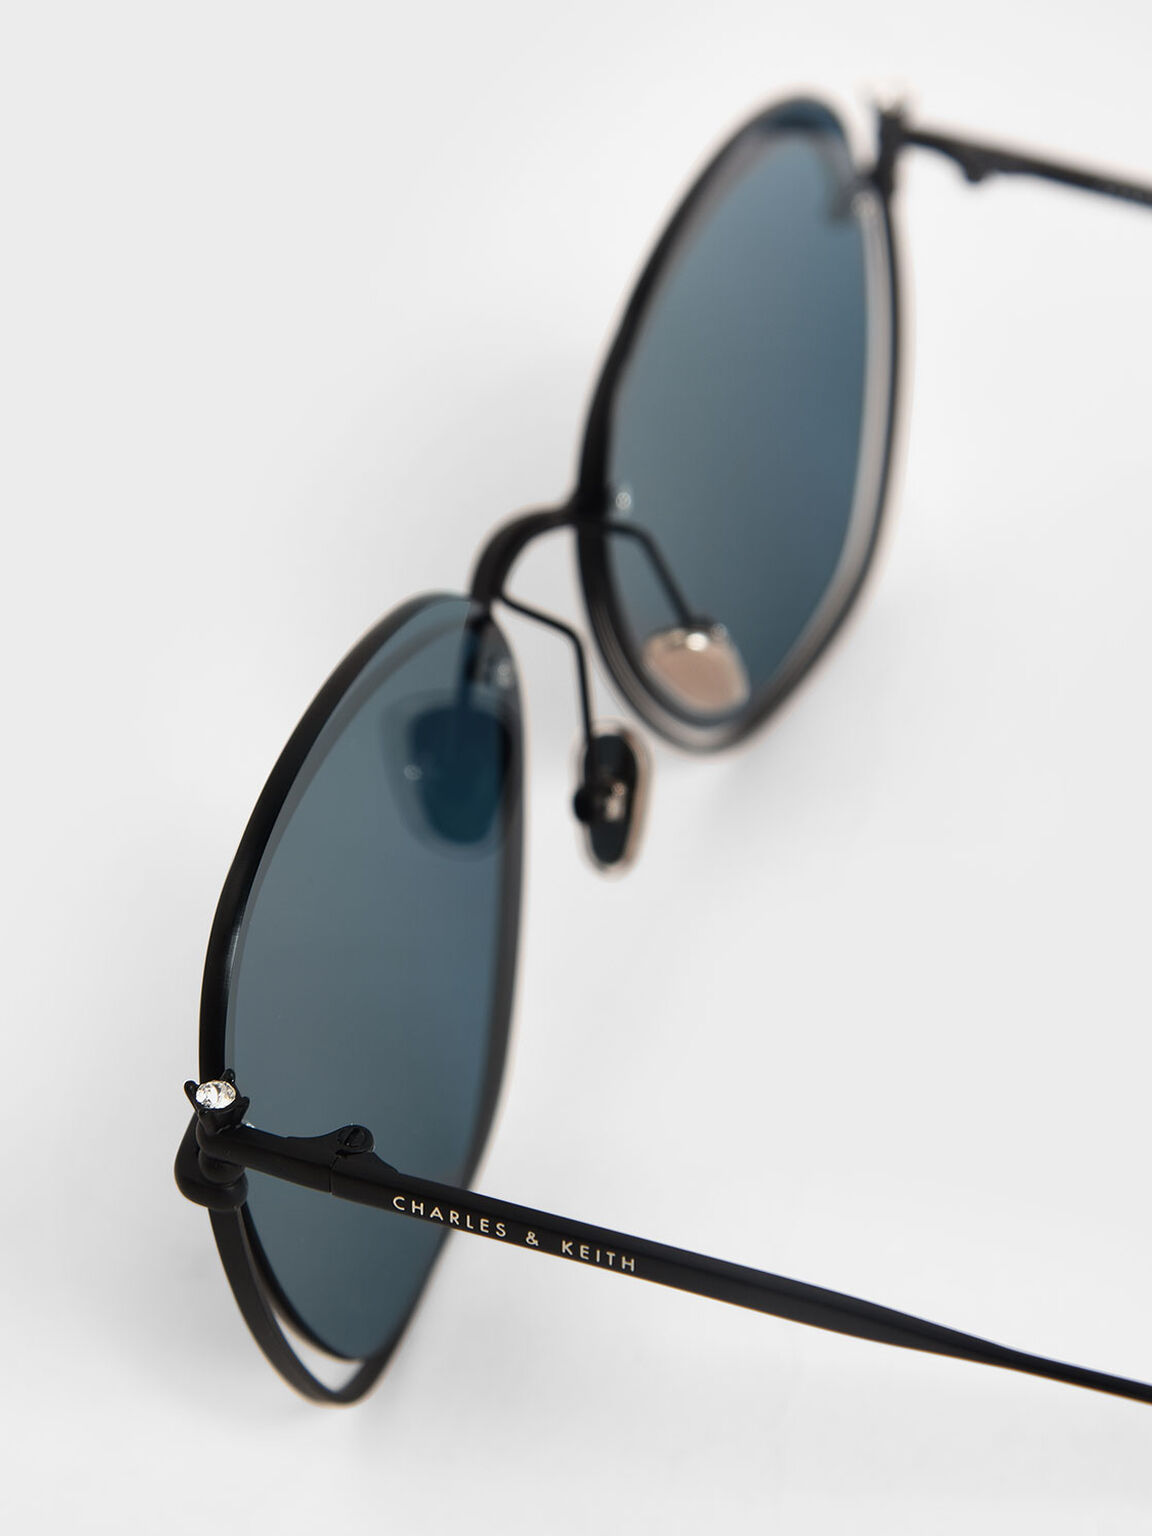 Cut-Out Butterfly Sunglasses, Dark Blue, hi-res